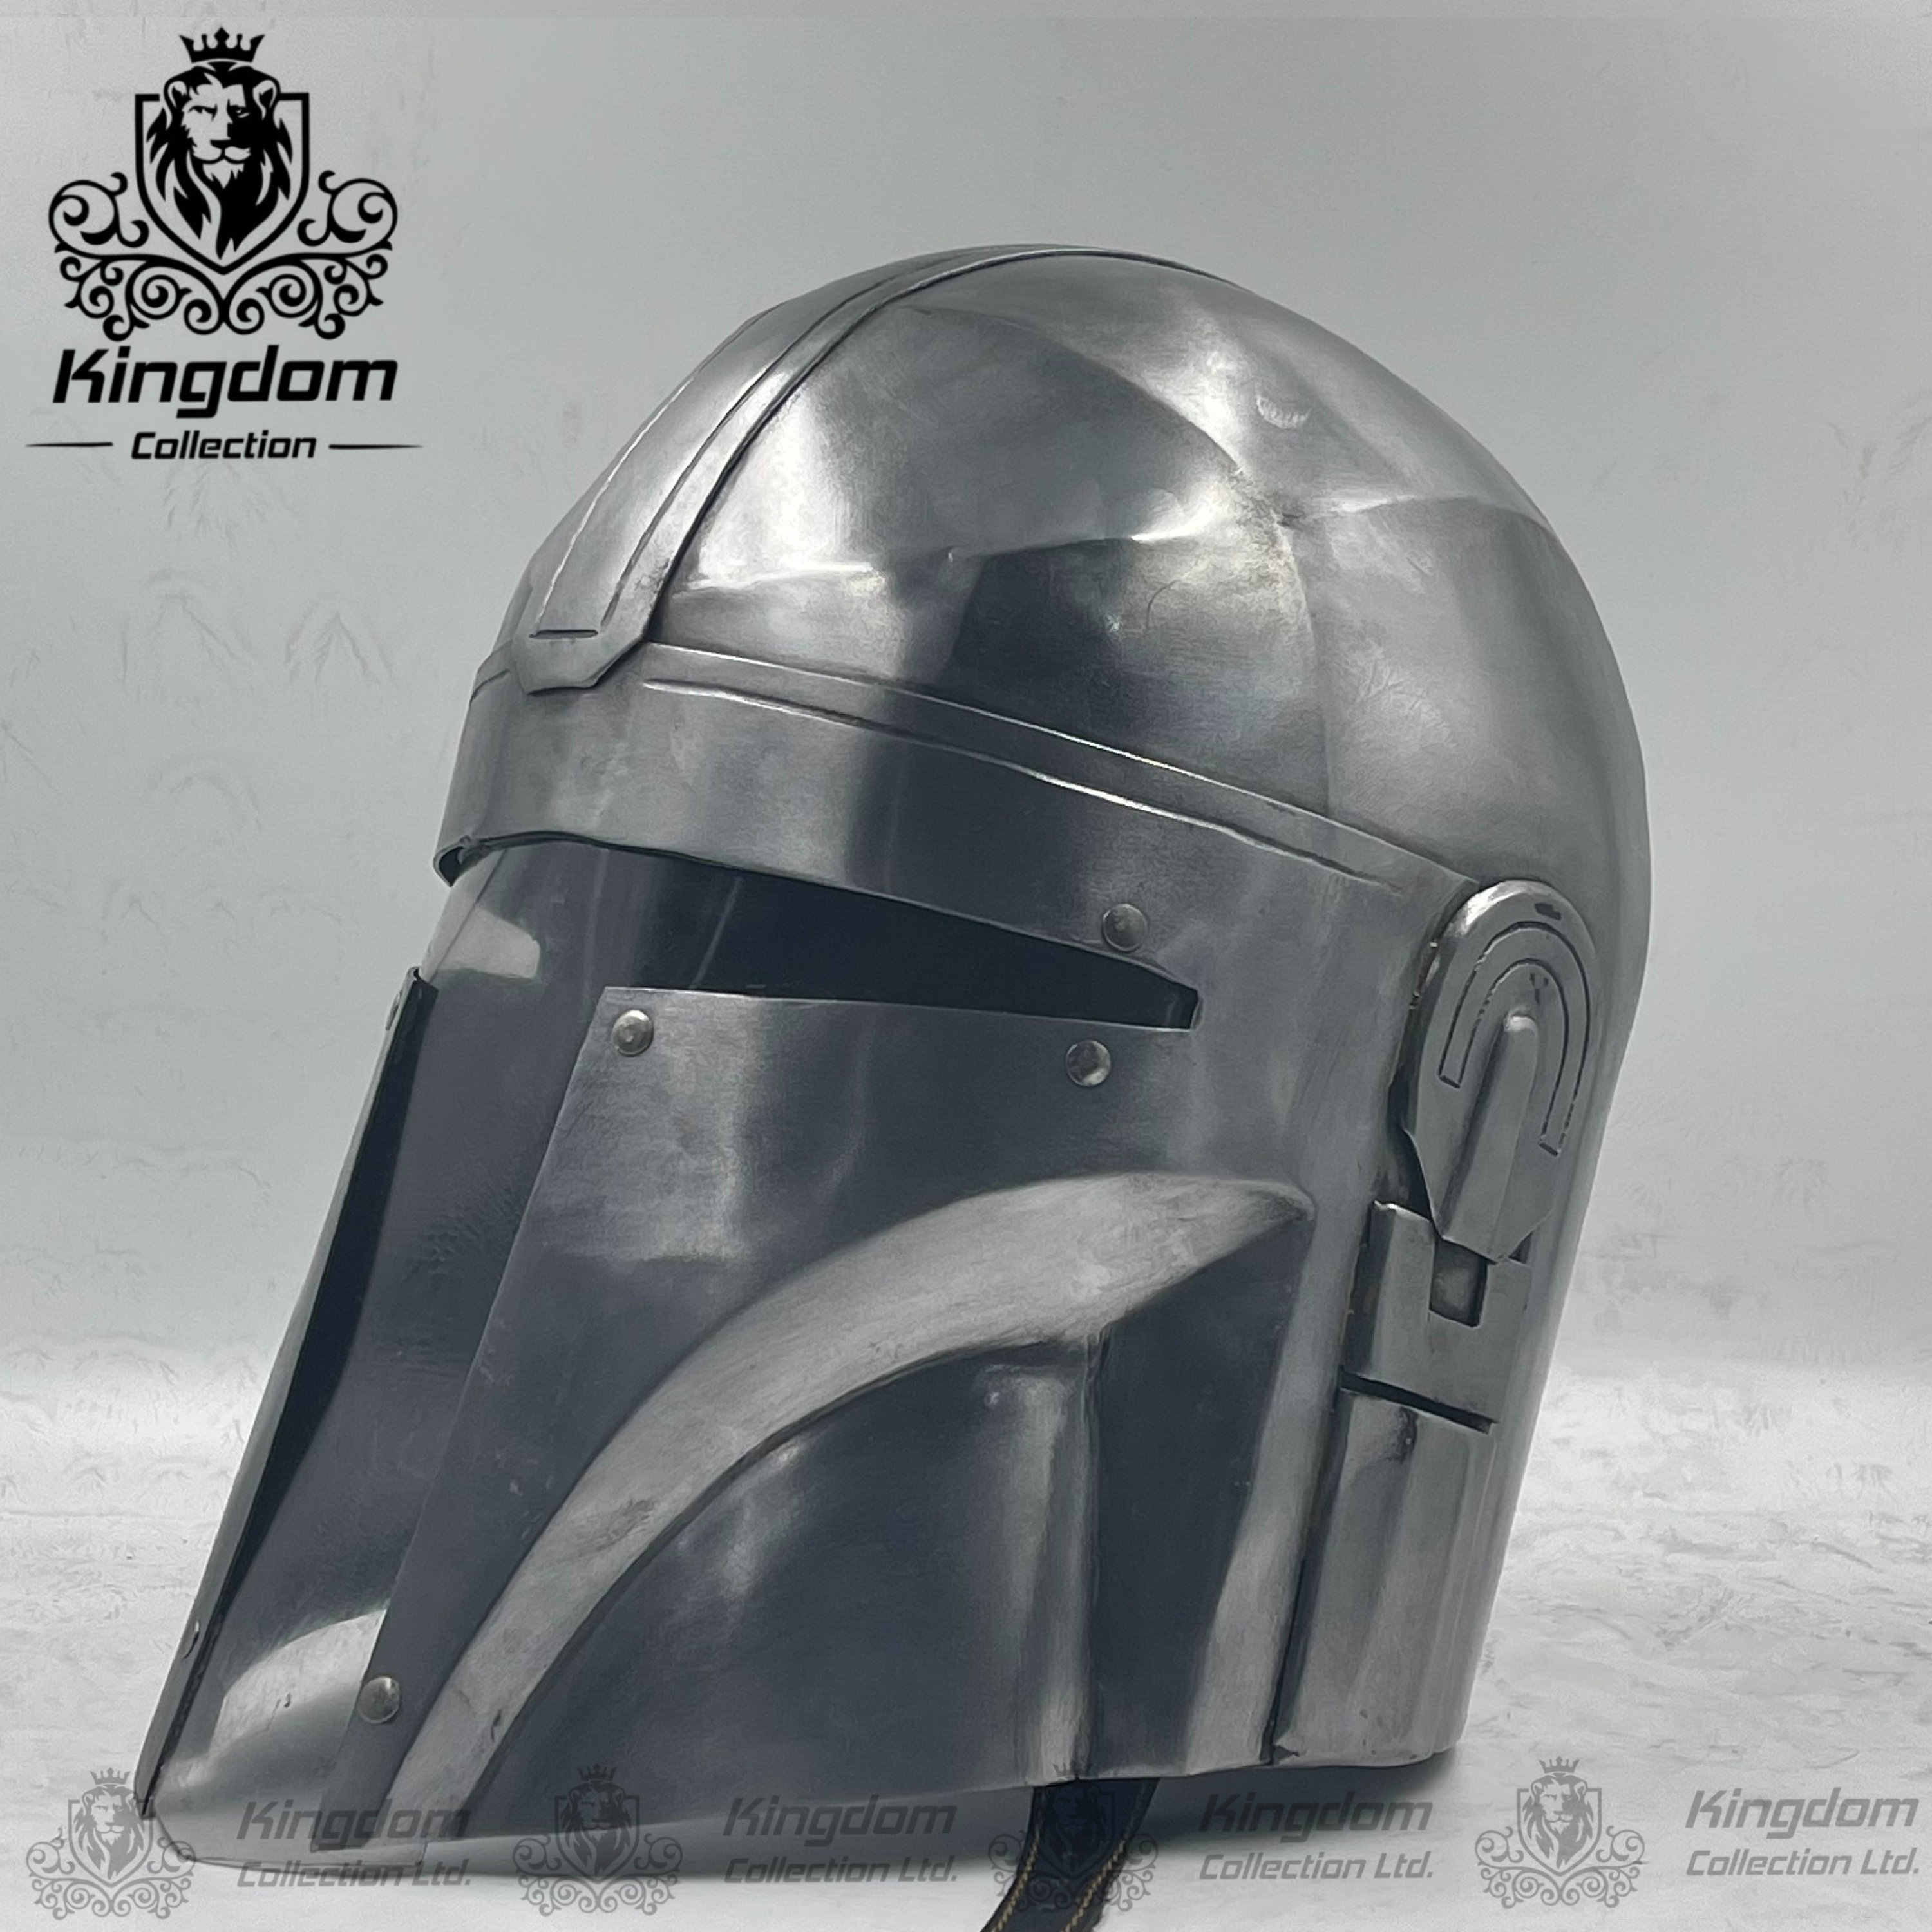 Details about   MEDIEVAL KNIGHT BURGONET EUROPEAN CLOSED ARMOR HELMET HALLOWEEN ROLE PLAY REPLIC 